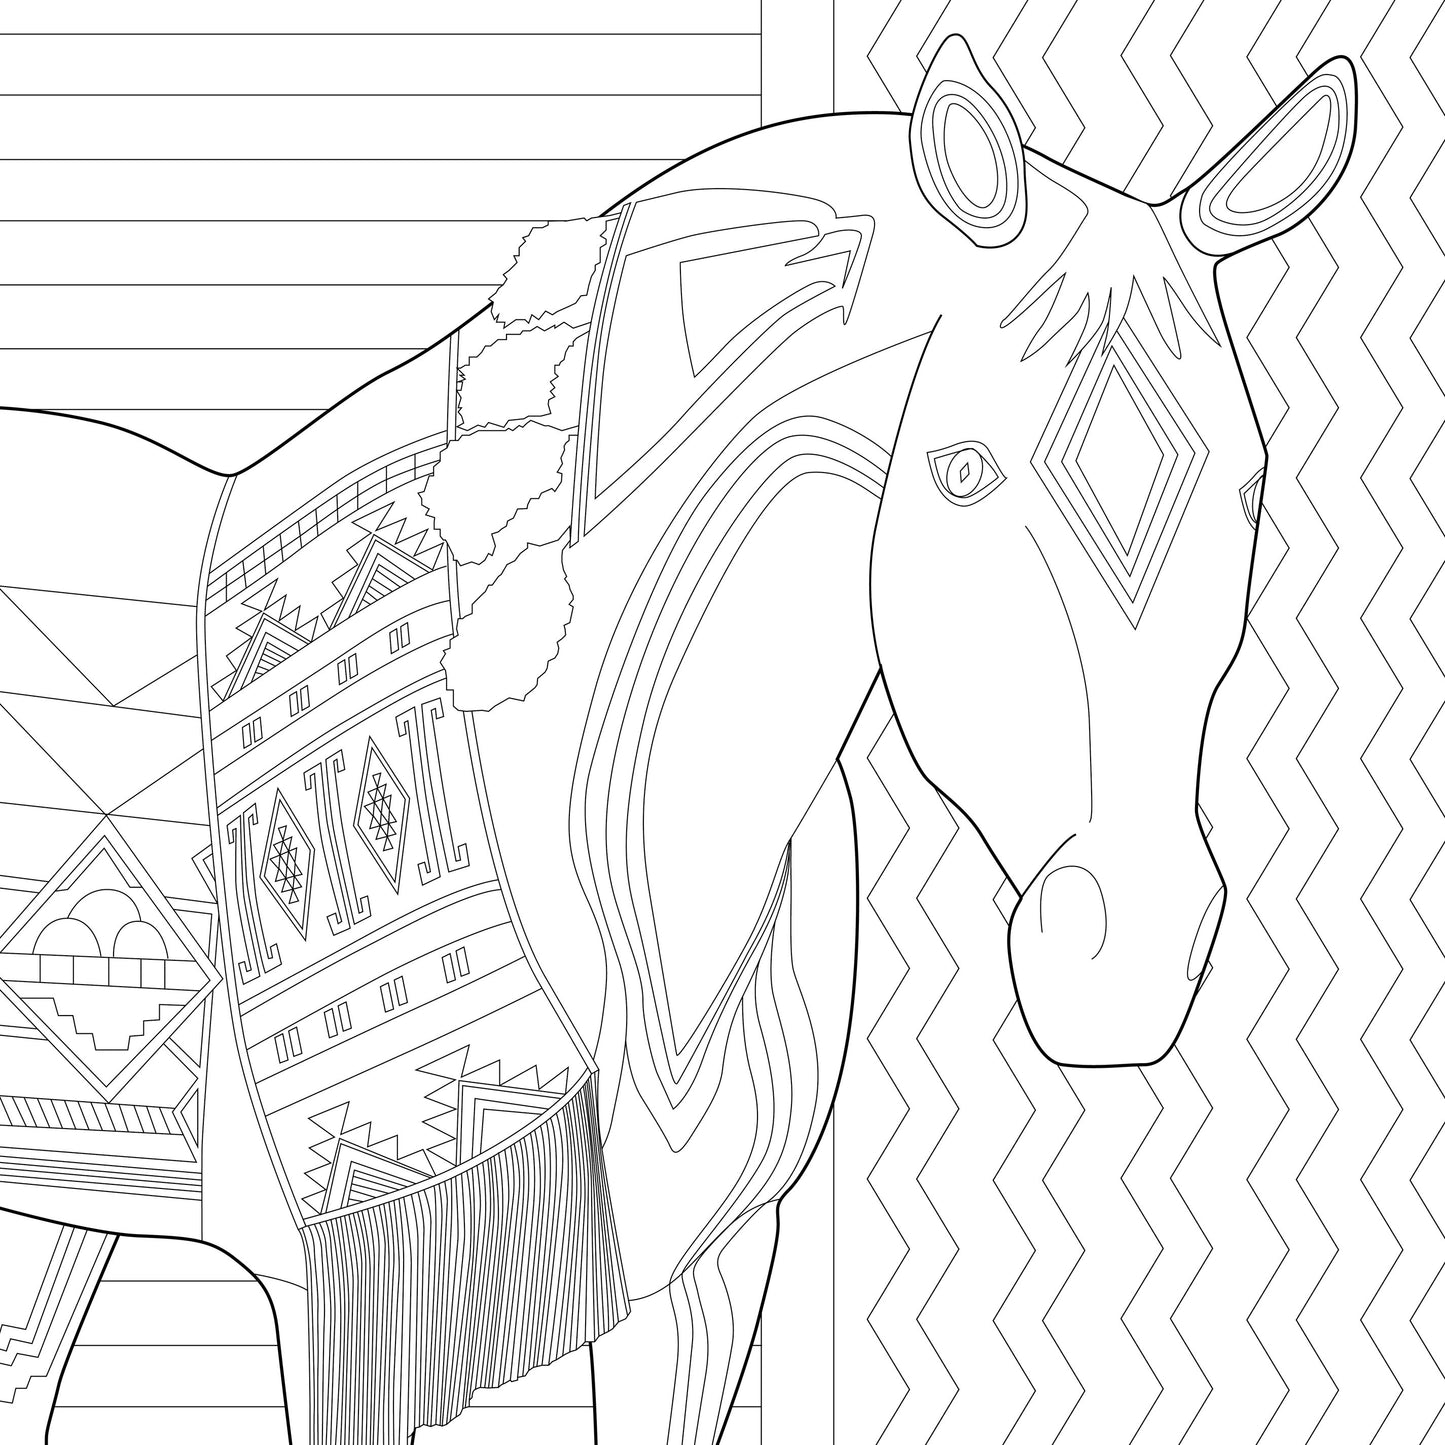 The Trail of Painted Ponies Adult Coloring Book - Native American Edition